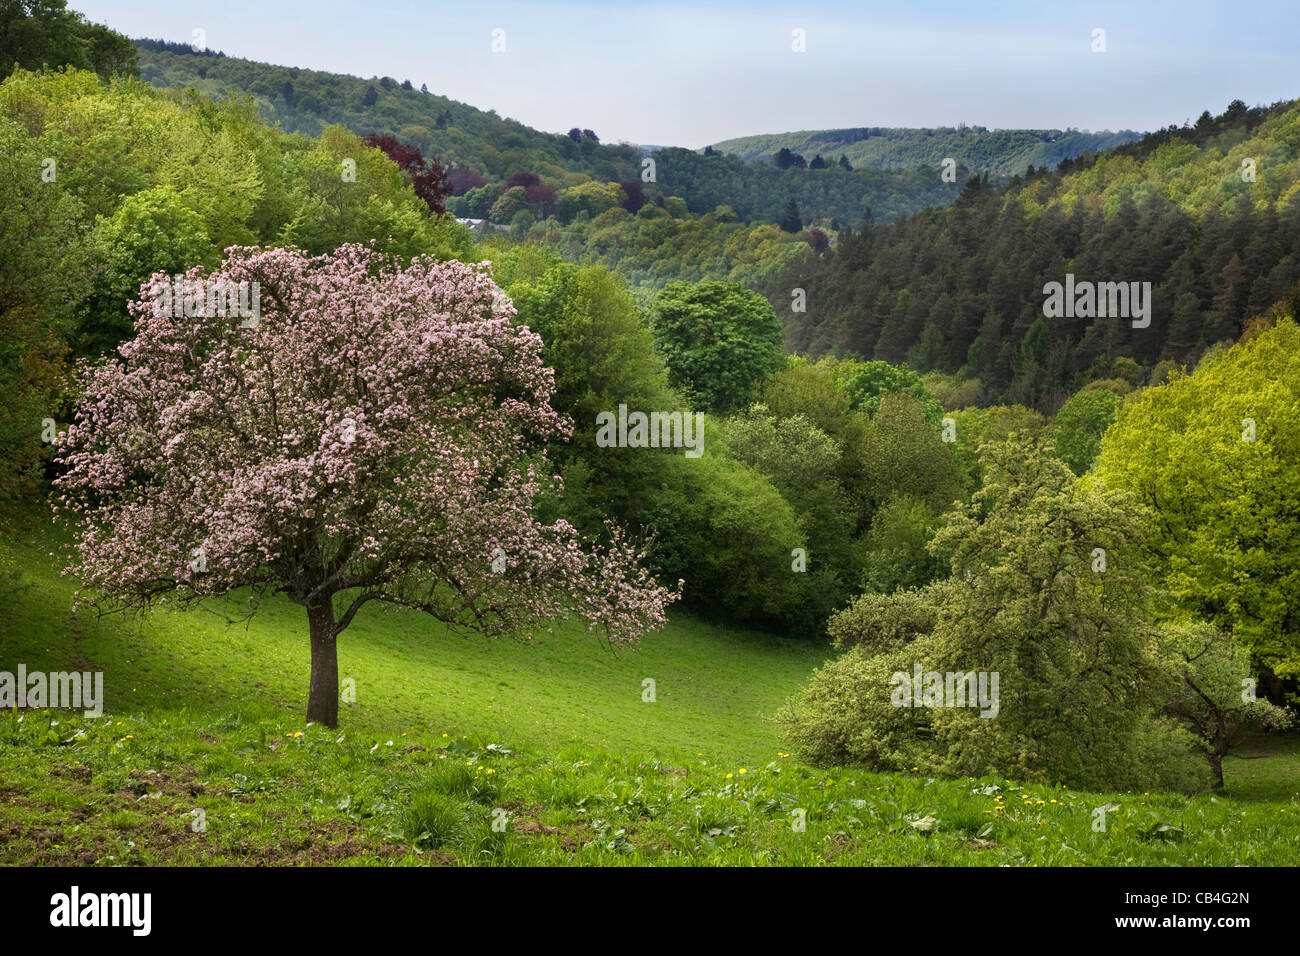 Apple tree blooming in hilly landscape, Pepinster, Ardennes, Belgium Stock Photo